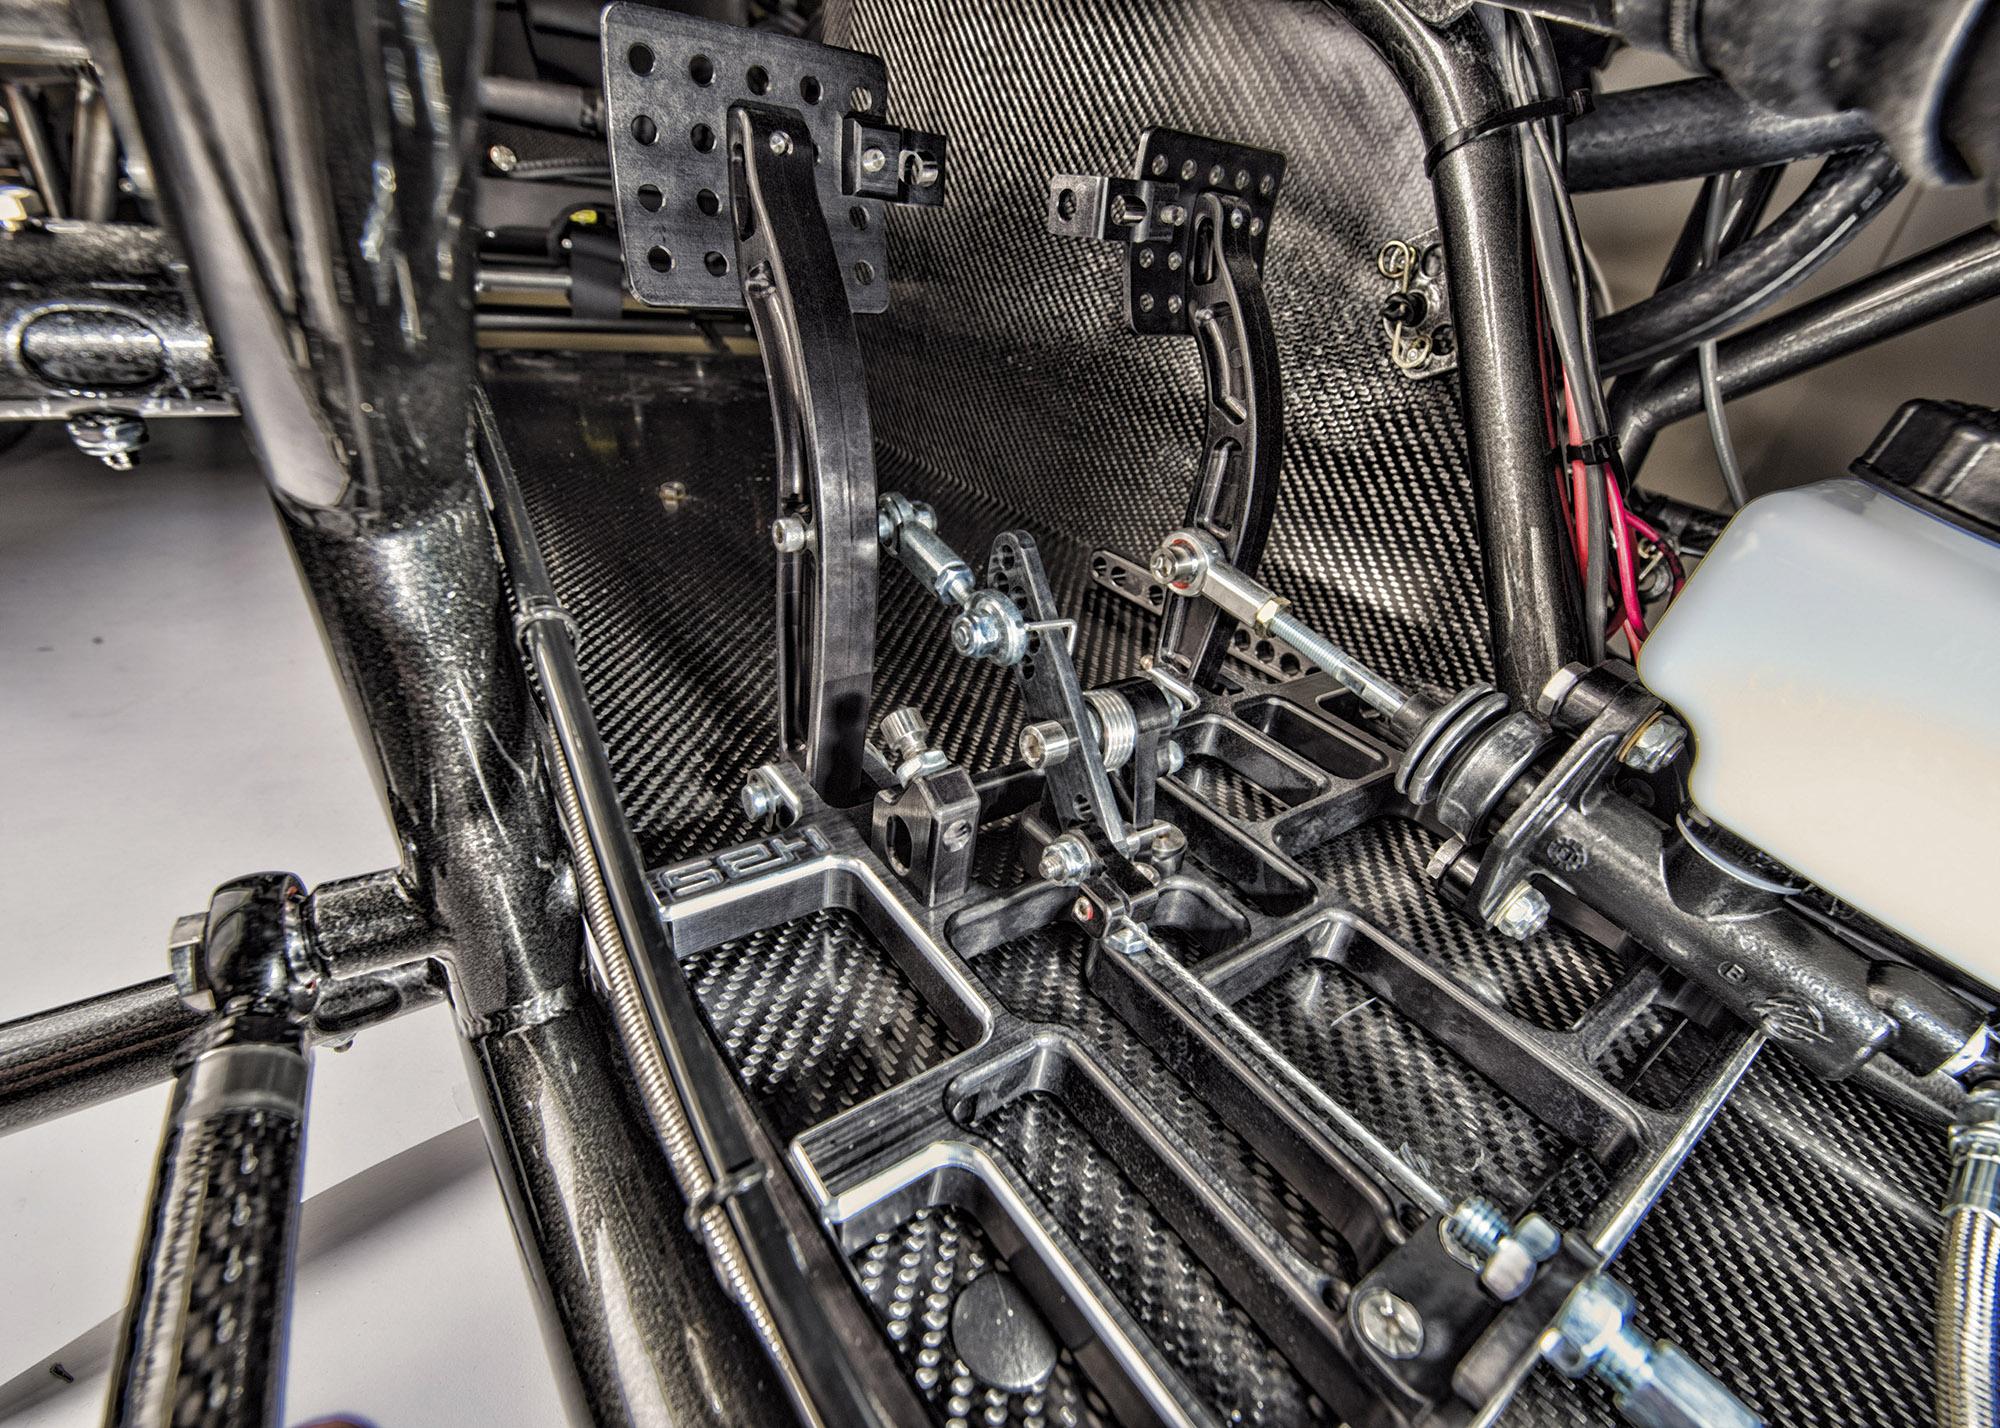 Adjustable pedals fit any height driver, and adjust in minutes. The industry has seen nothing like this, in any class of racing.